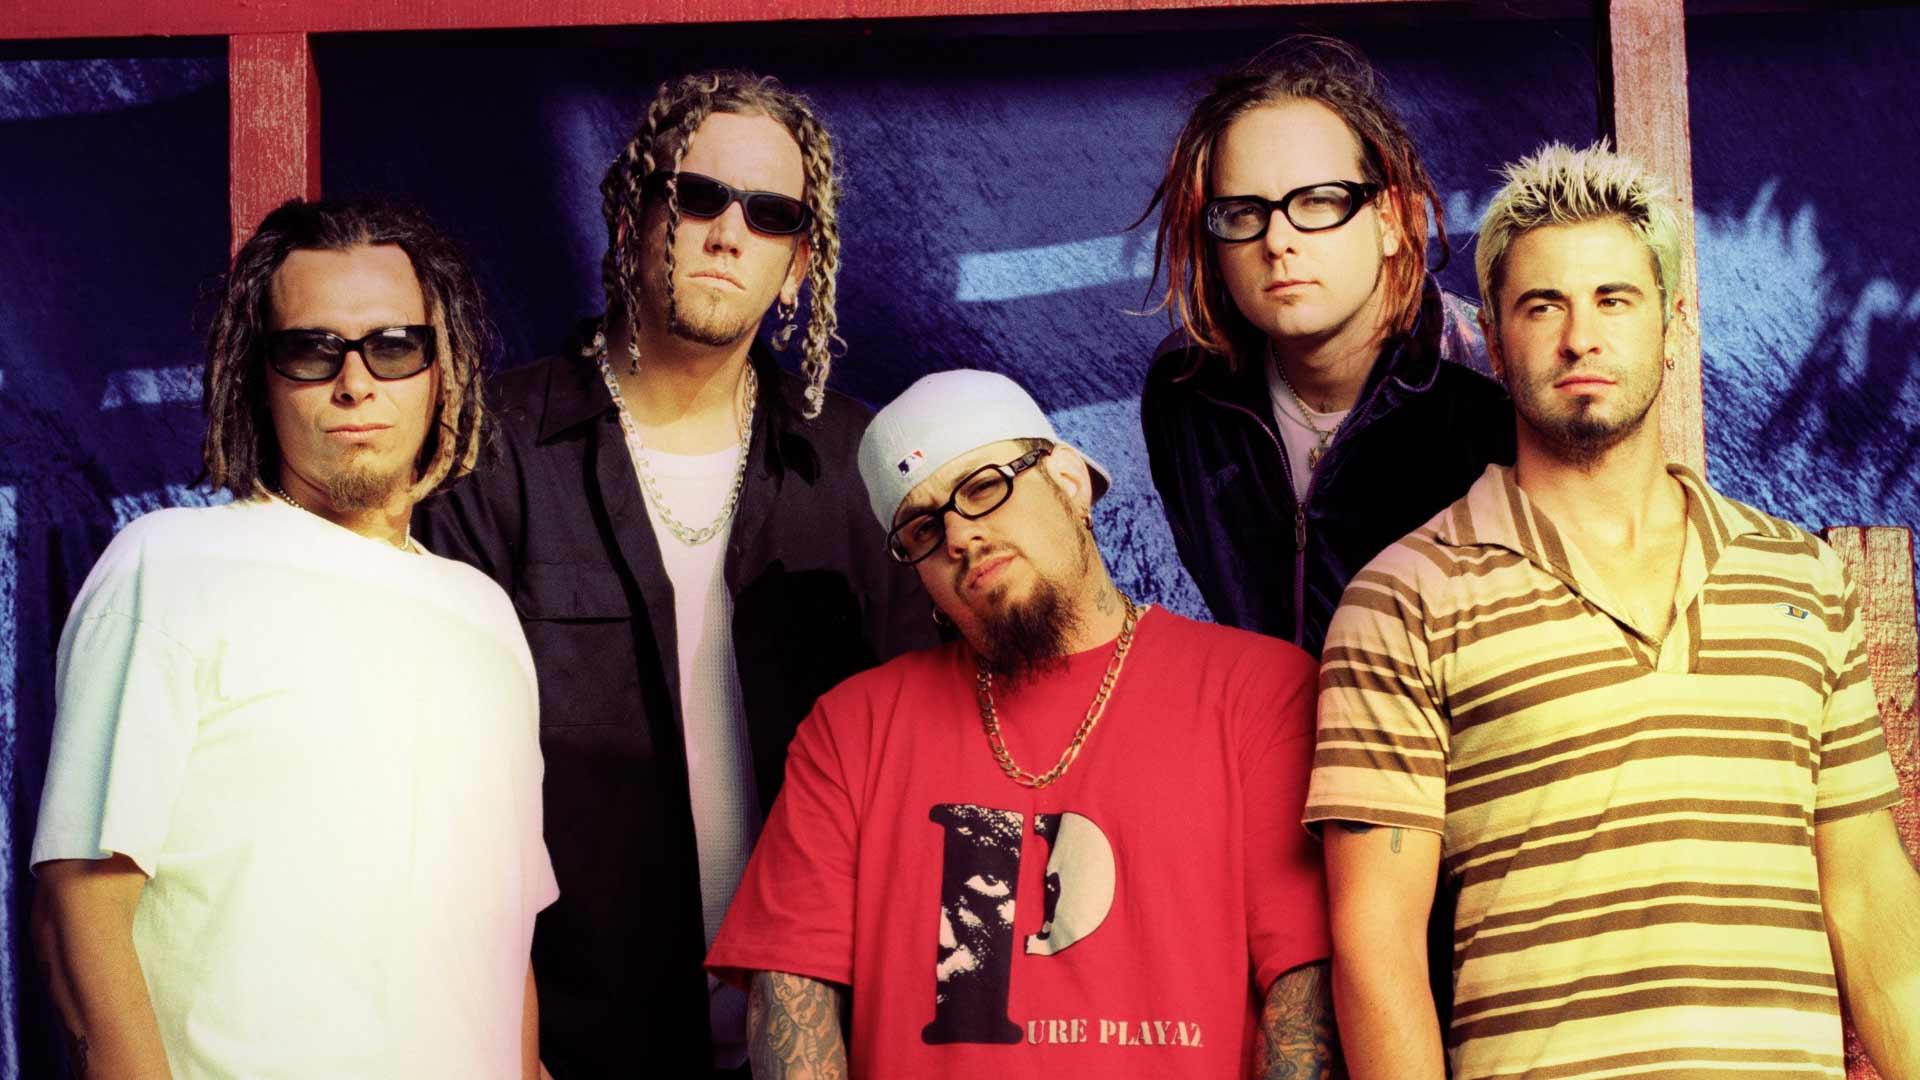 Former Korn Member Countersues Band Claiming They Screwed Him Over on Royalties